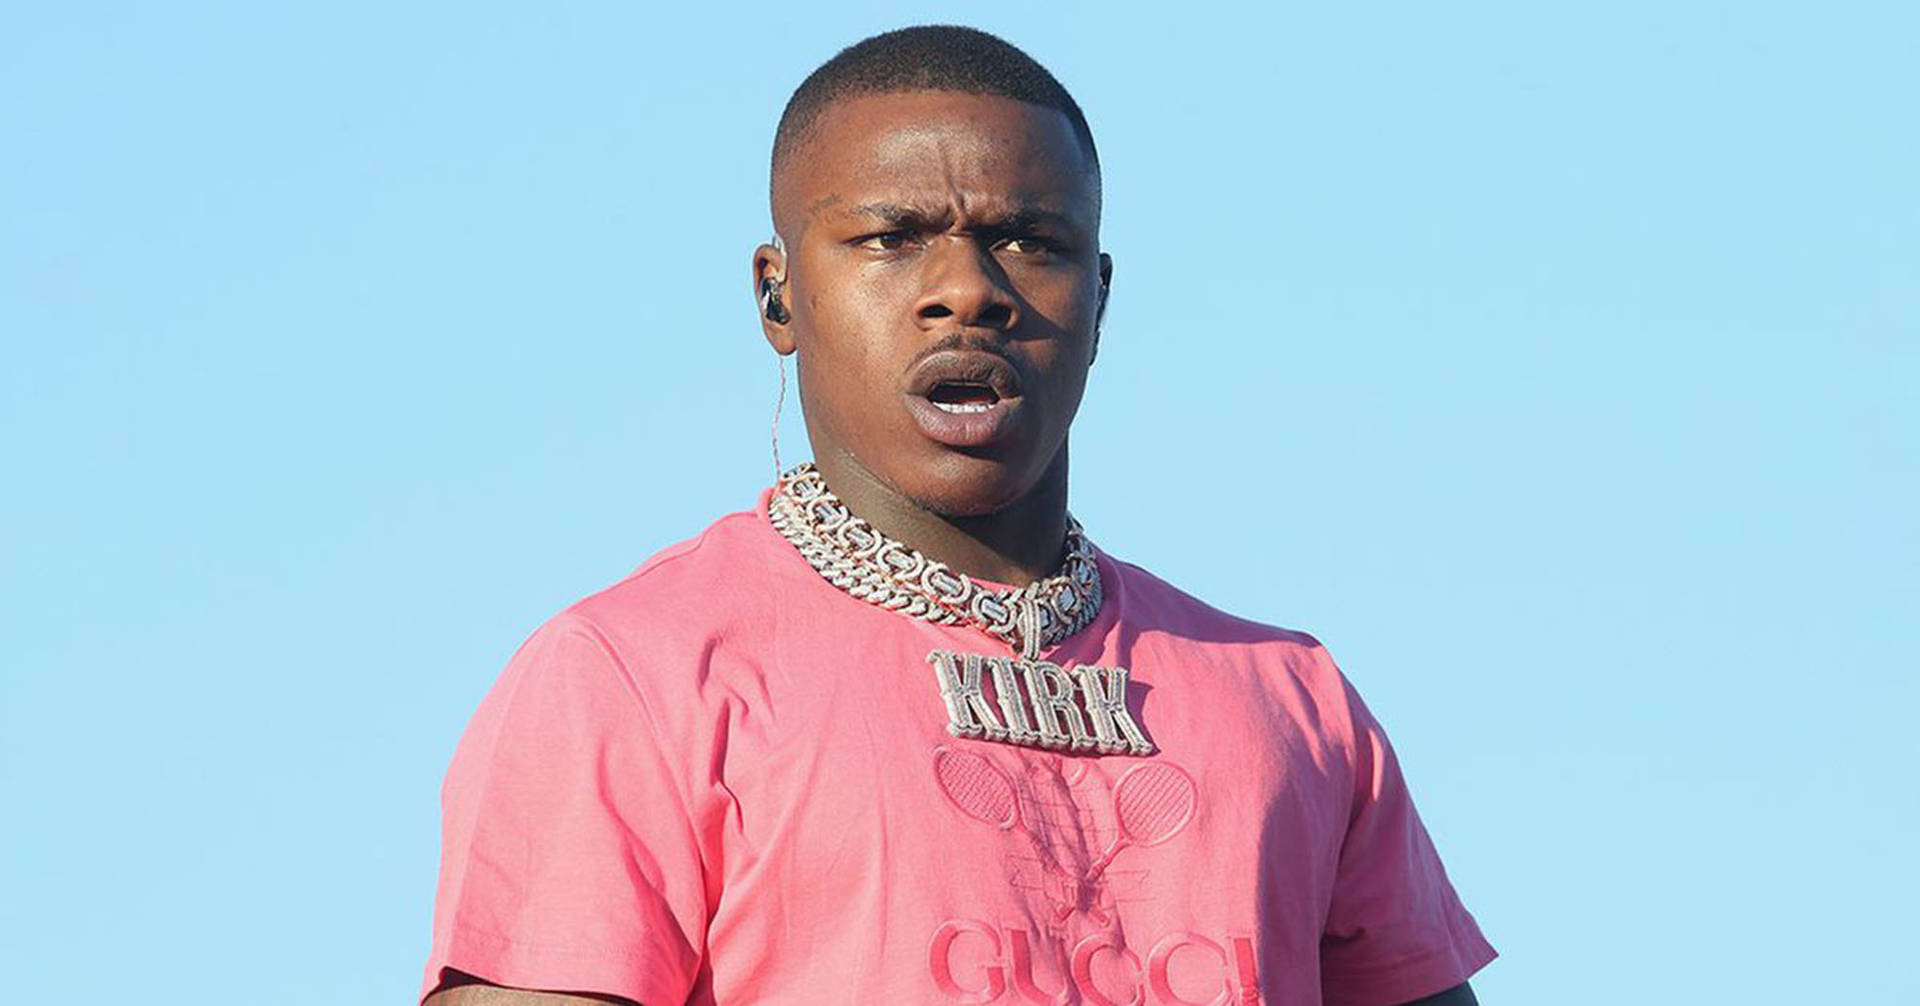 Dababy In Pink Shirt Performance Outfit